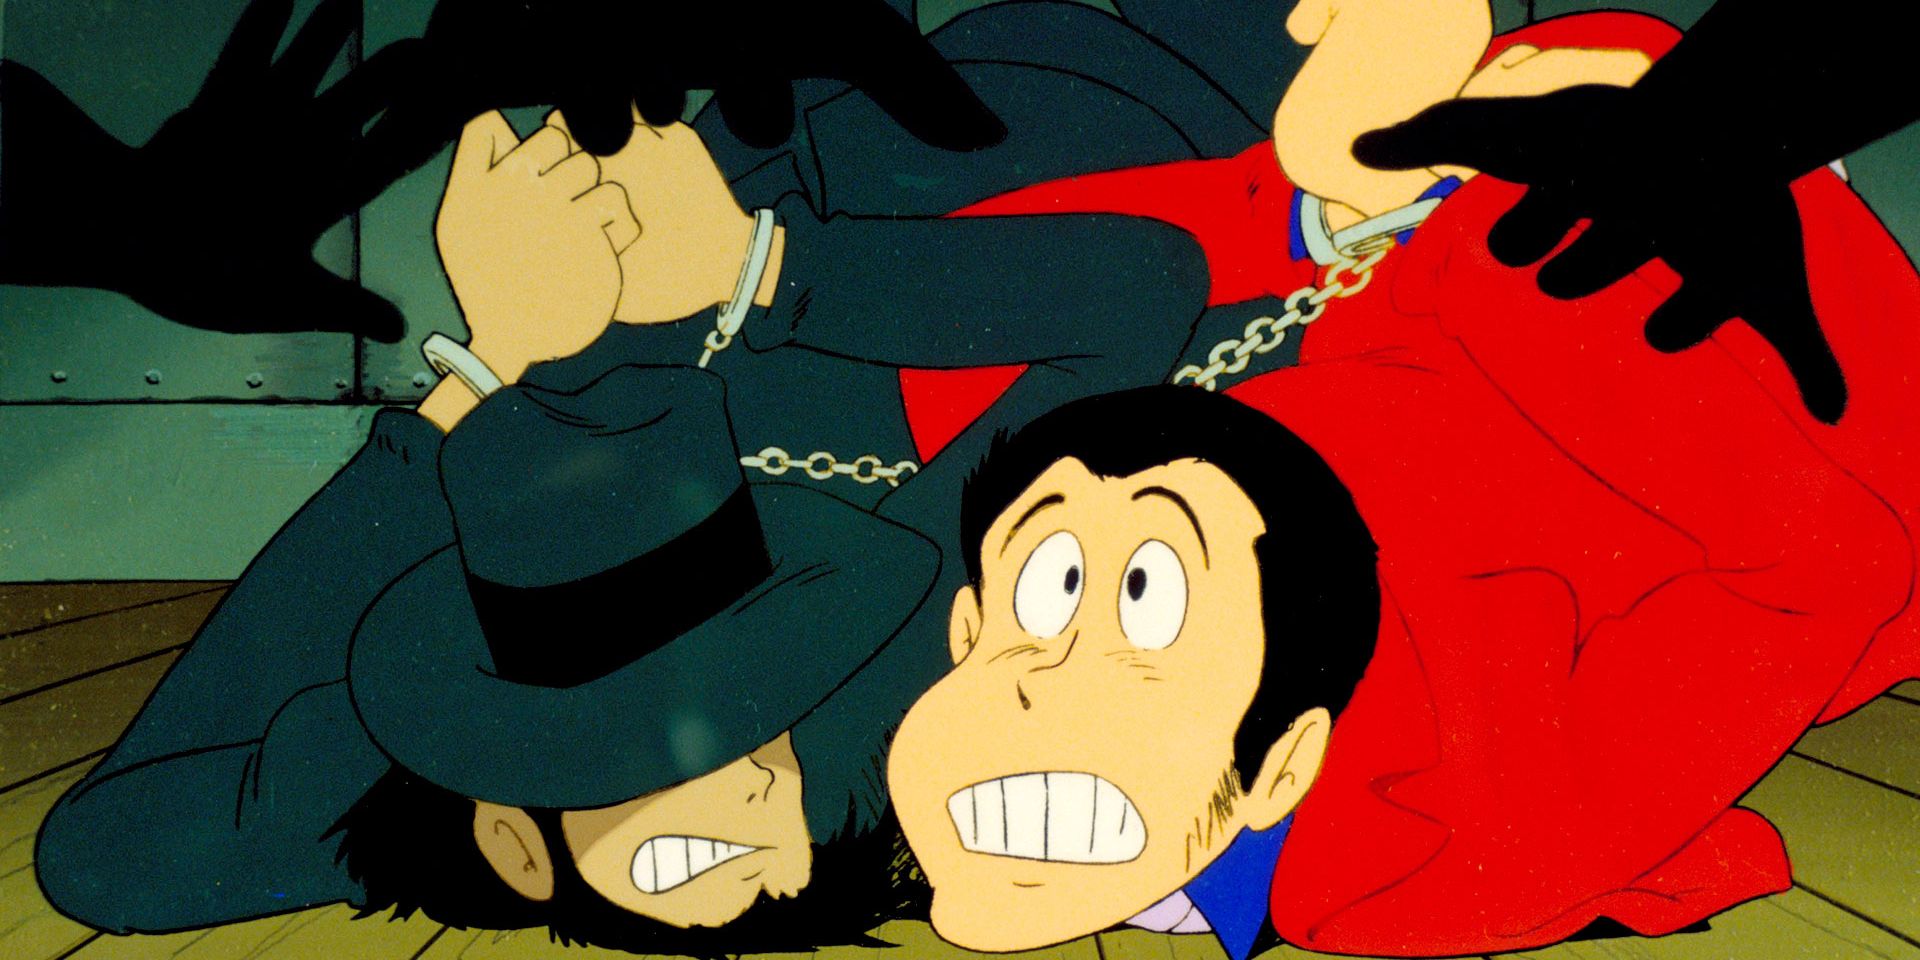 Lupin gets arrested alongside Goemon in Lupin the 3rd Part II